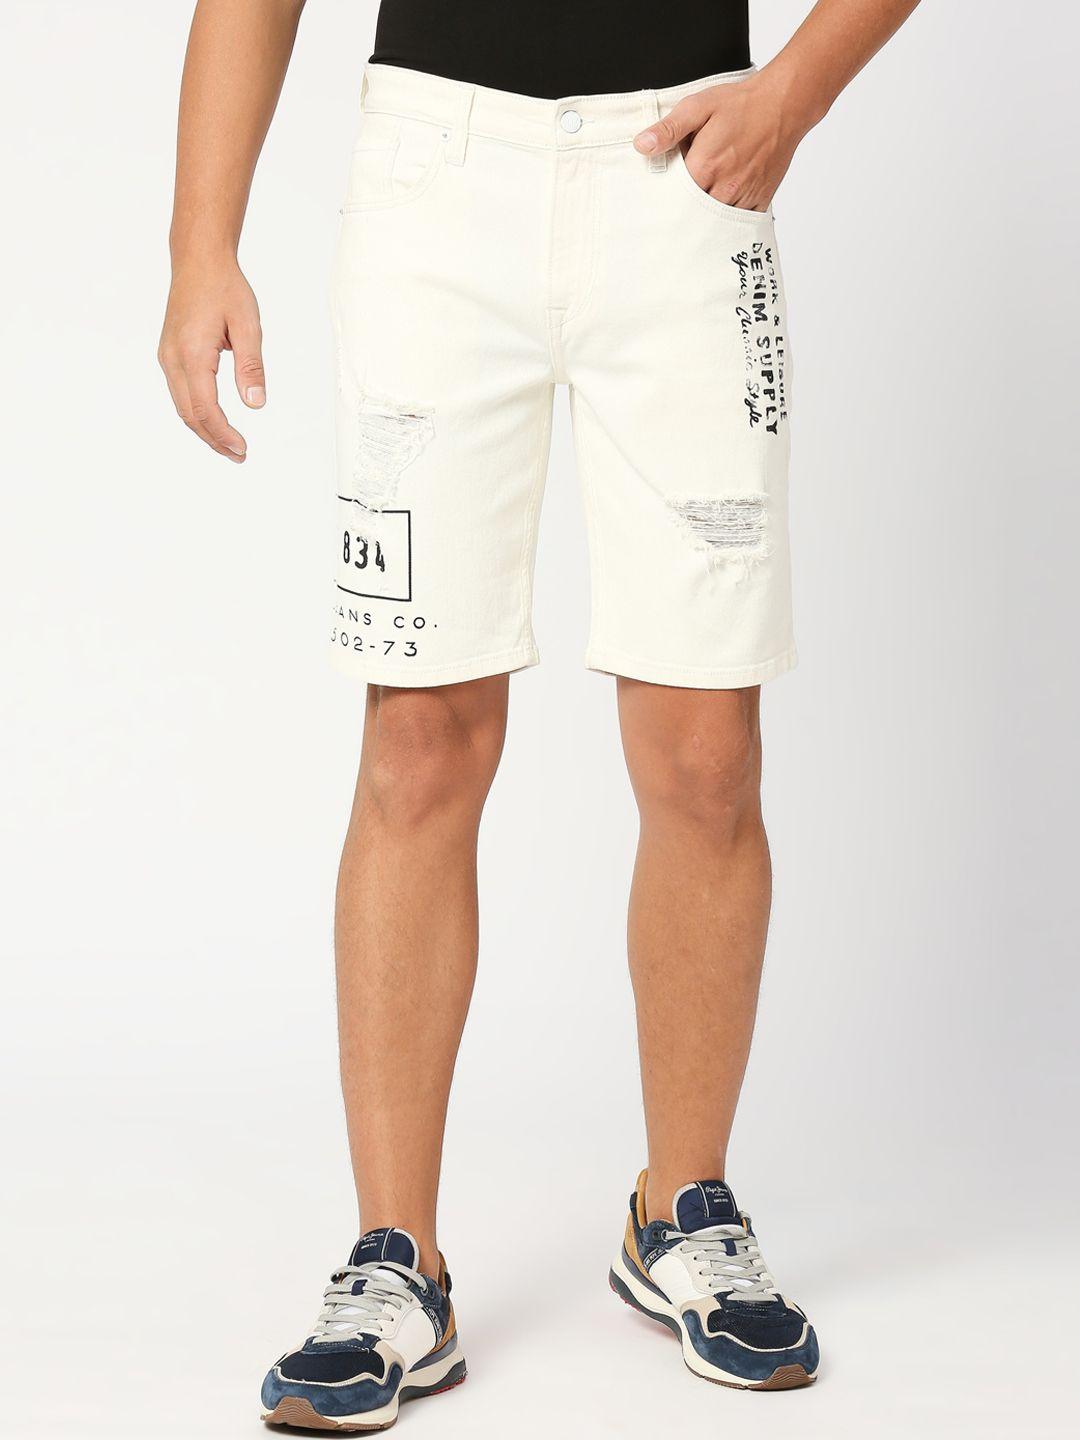 pepe jeans men mid-rise typography printed casual denim shorts